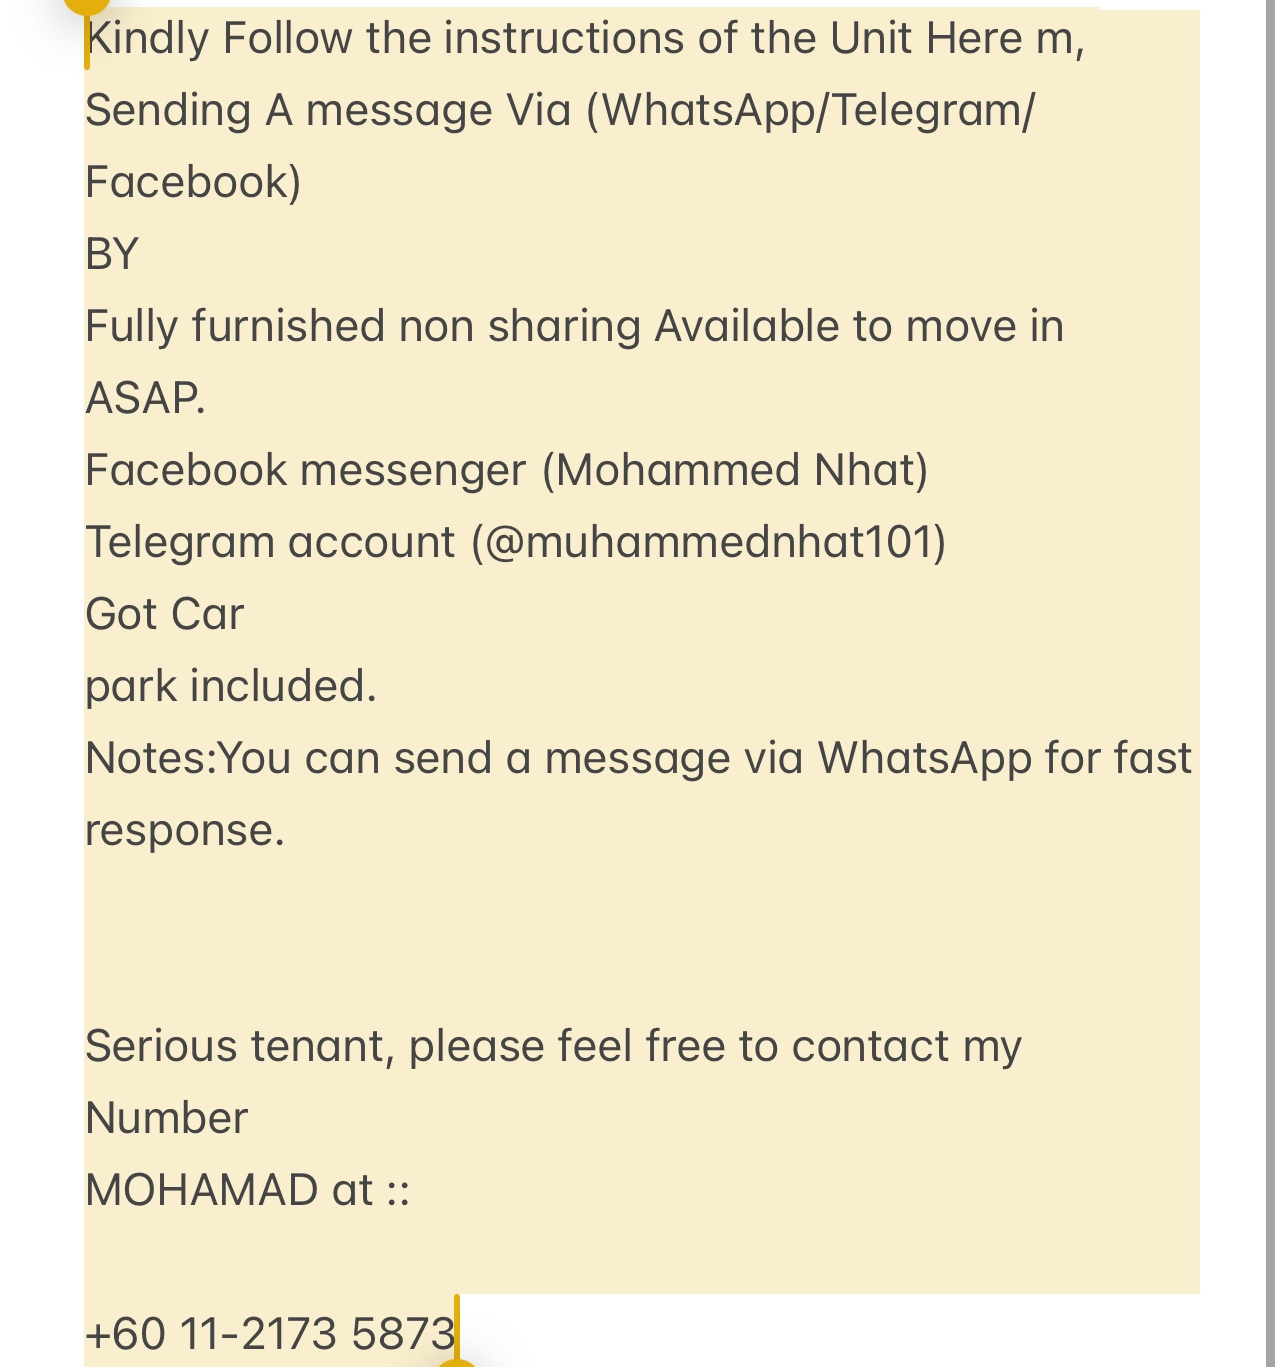 room for rent, studio, projek perumahan rakyat, Send the owner a message on WhatsApp/facebook if you want to RENT the unit facebook (Mohammed Nhat)&Telegram(@muhammednhat101) Fully furnished non sharing :(comfortable)